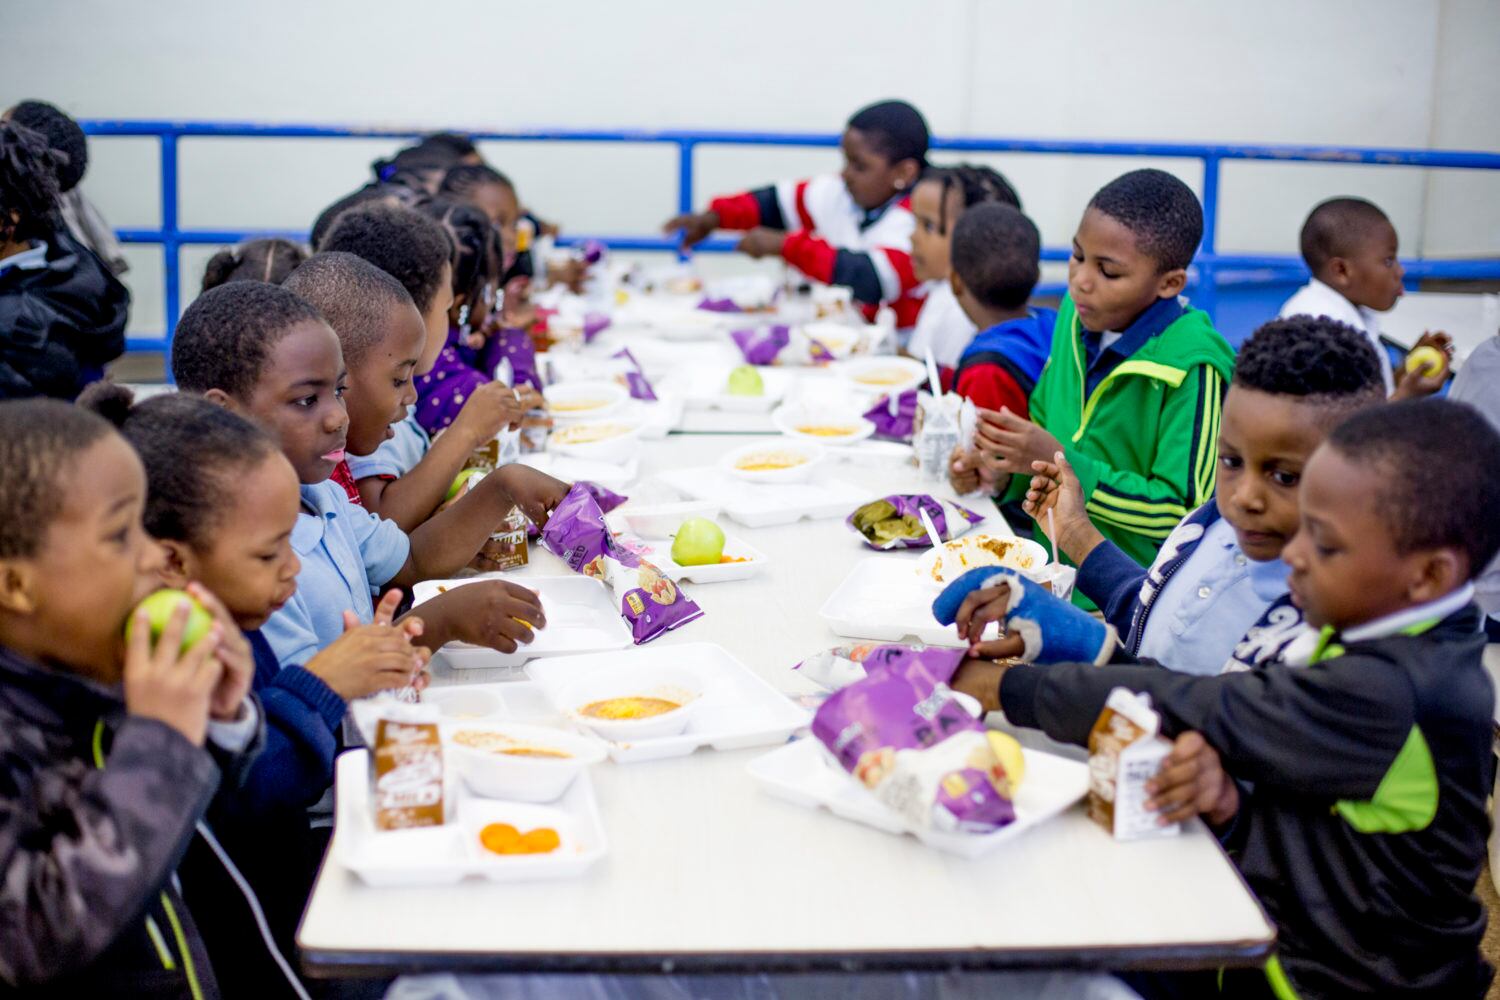 Young children sit at a long white table and eat lunch in a school cafeteria.